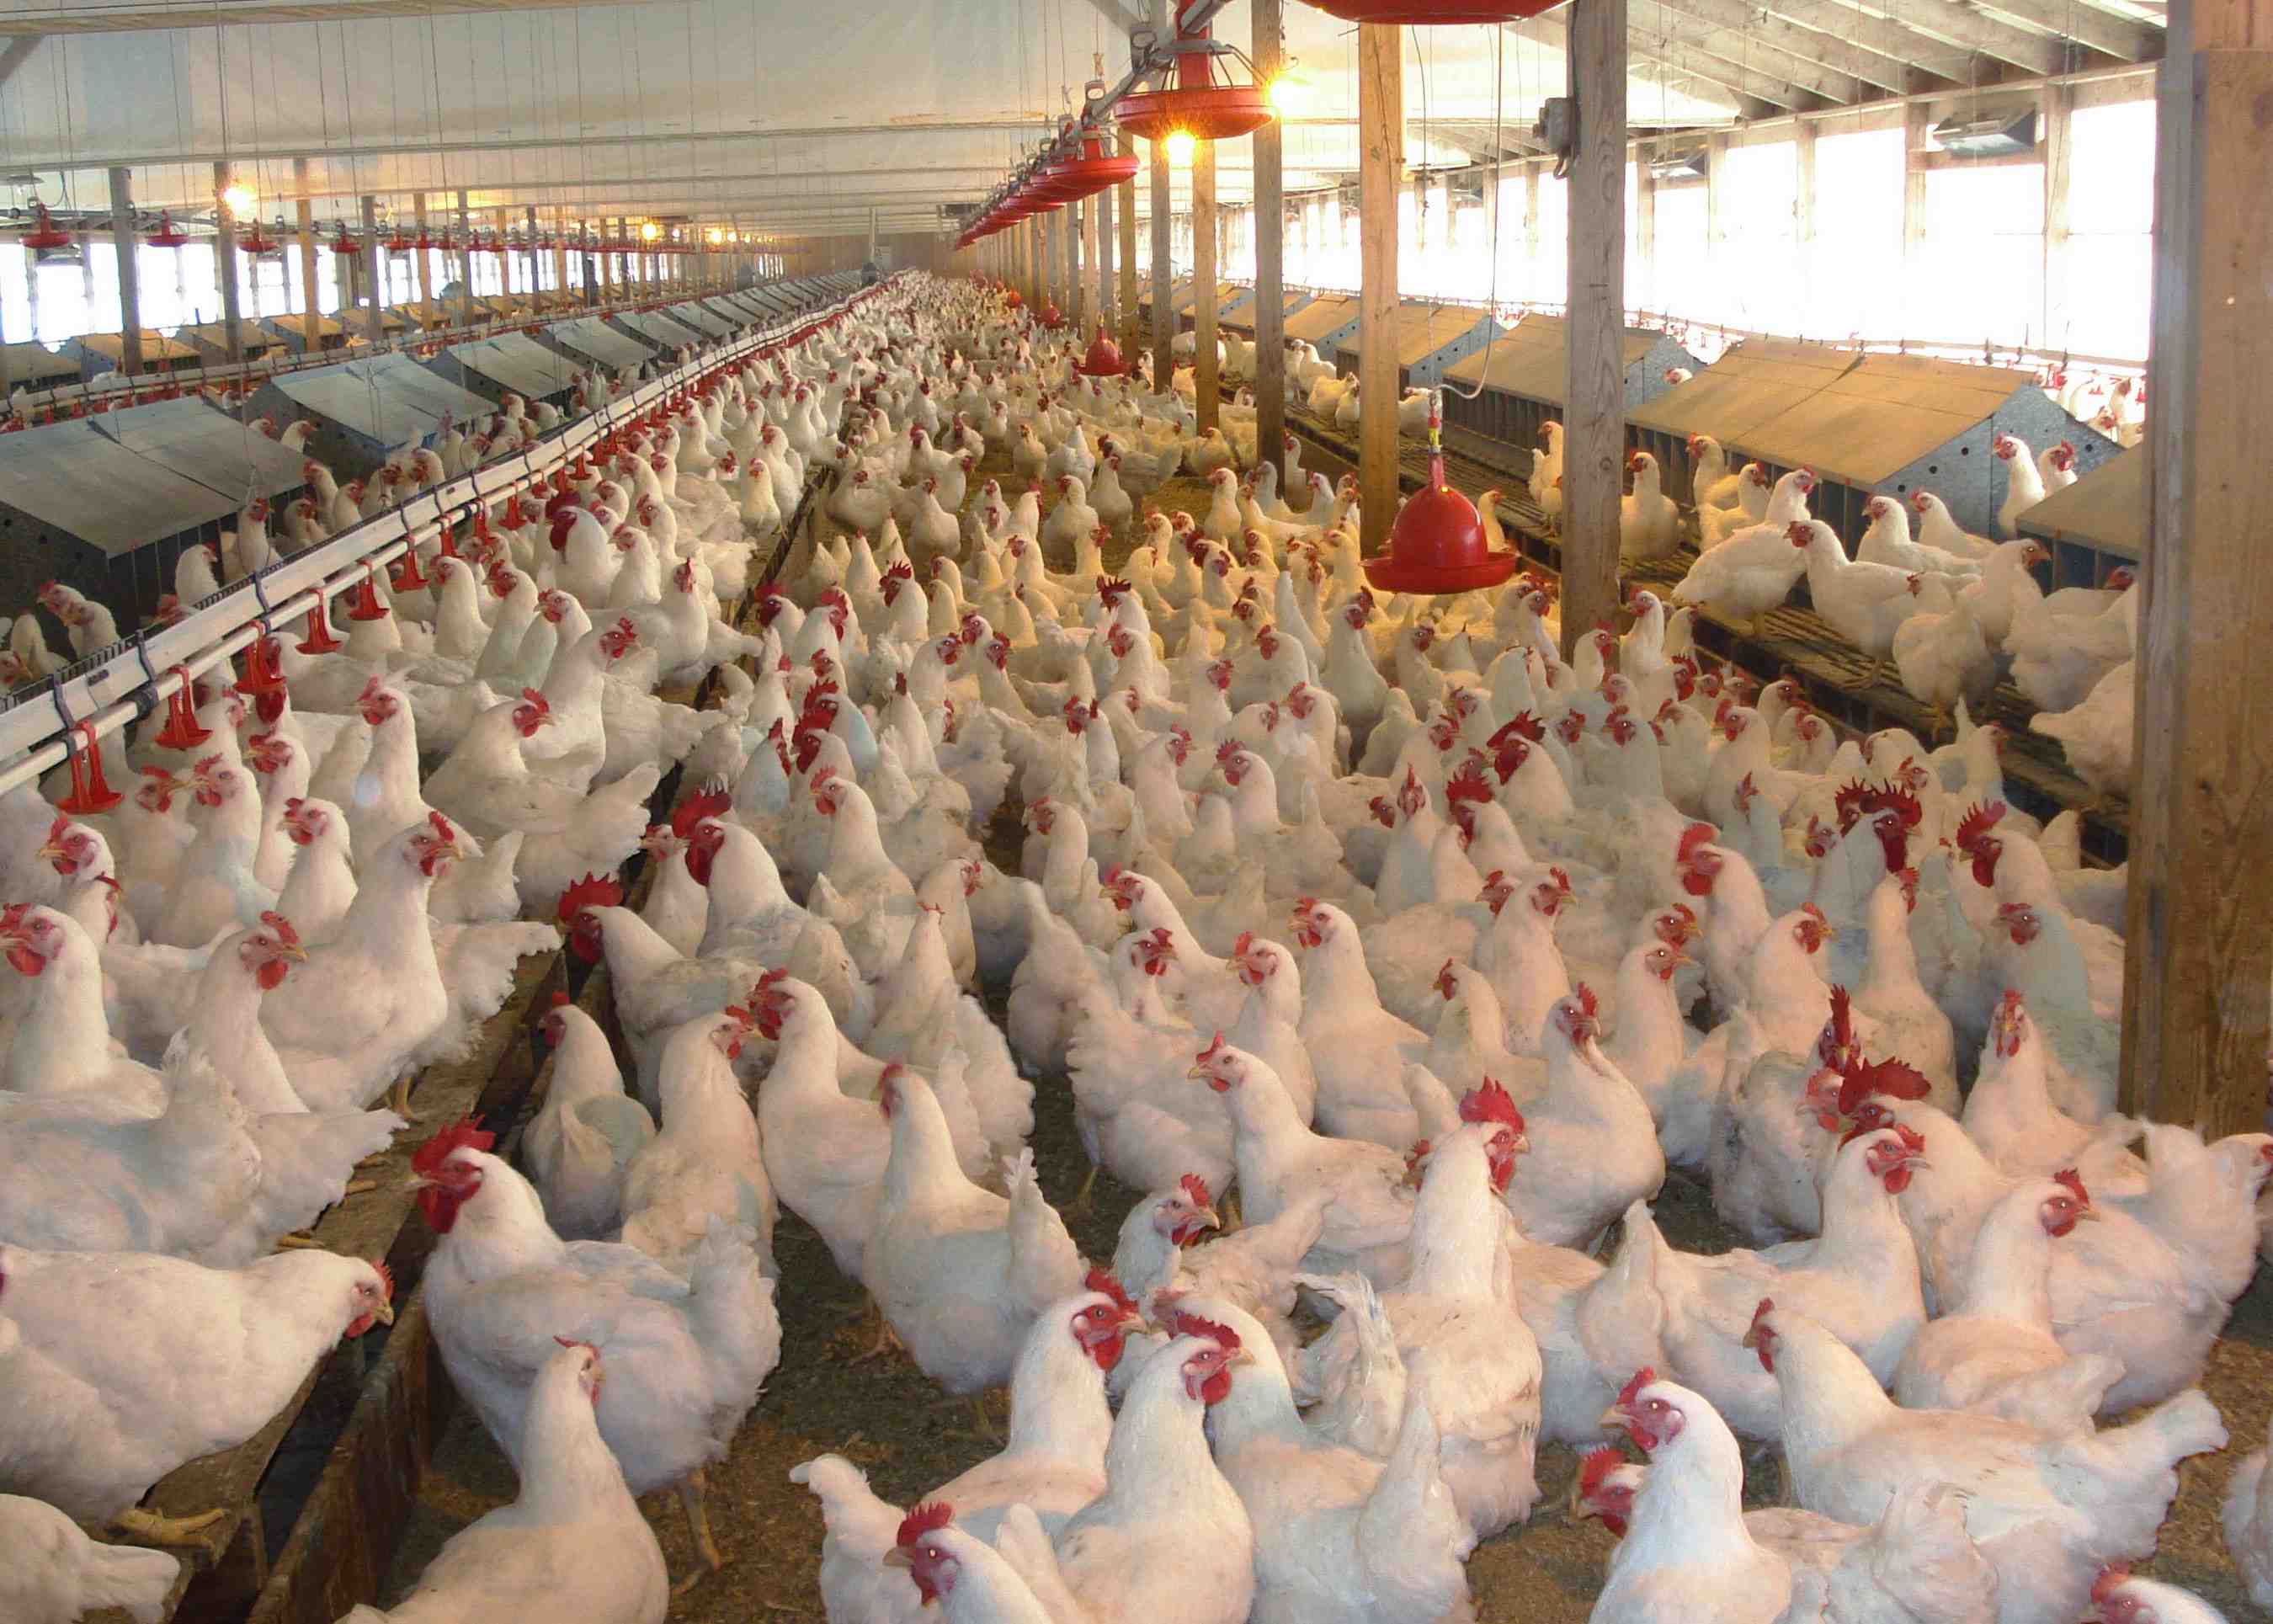 How to Start Poultry Farming in Nigeria